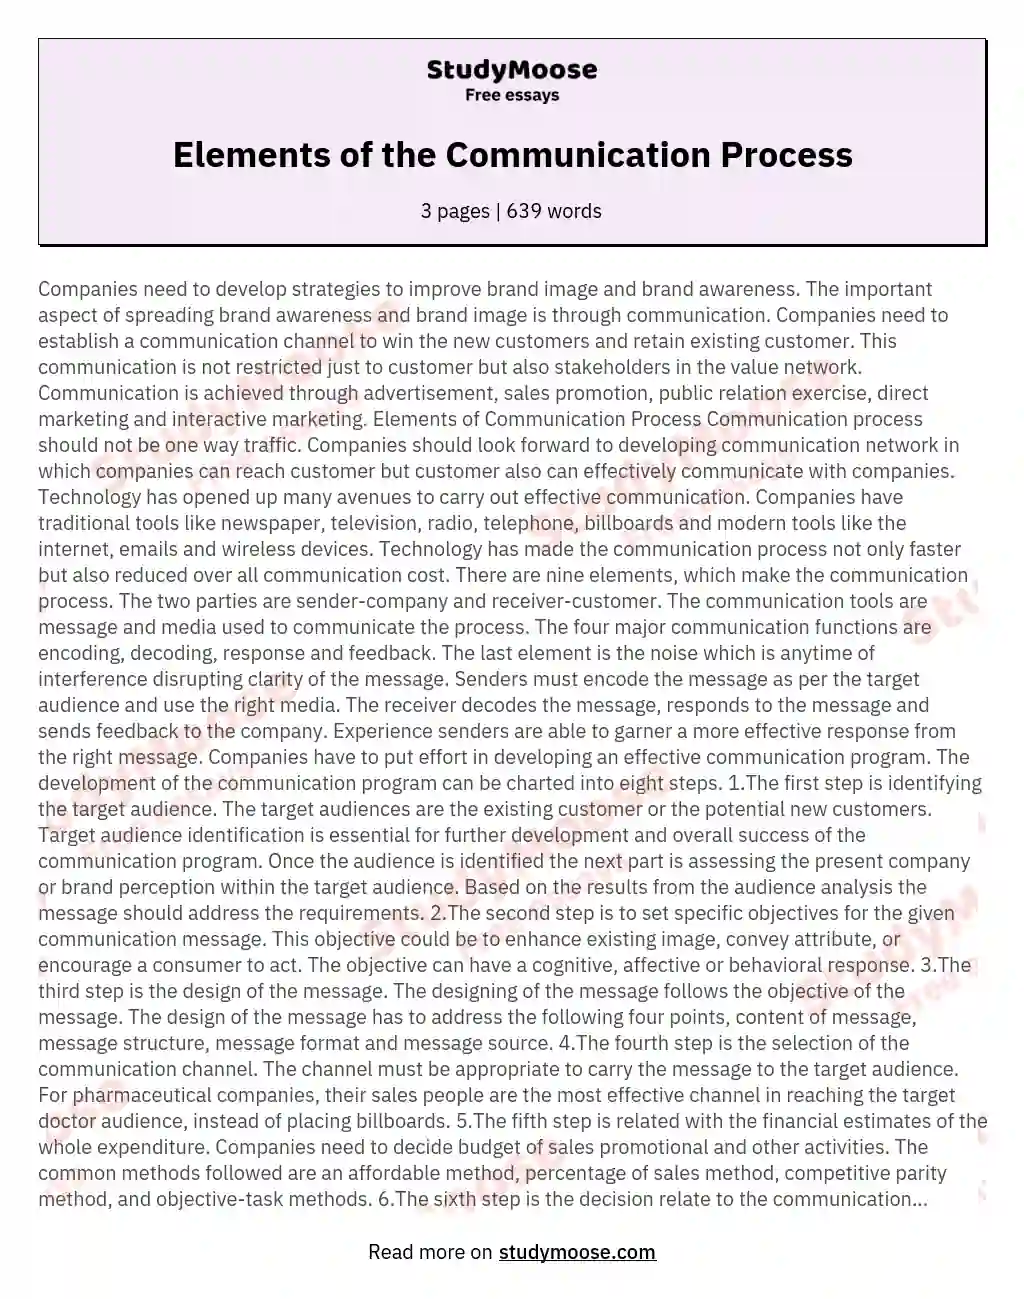 Elements of the Communication Process essay